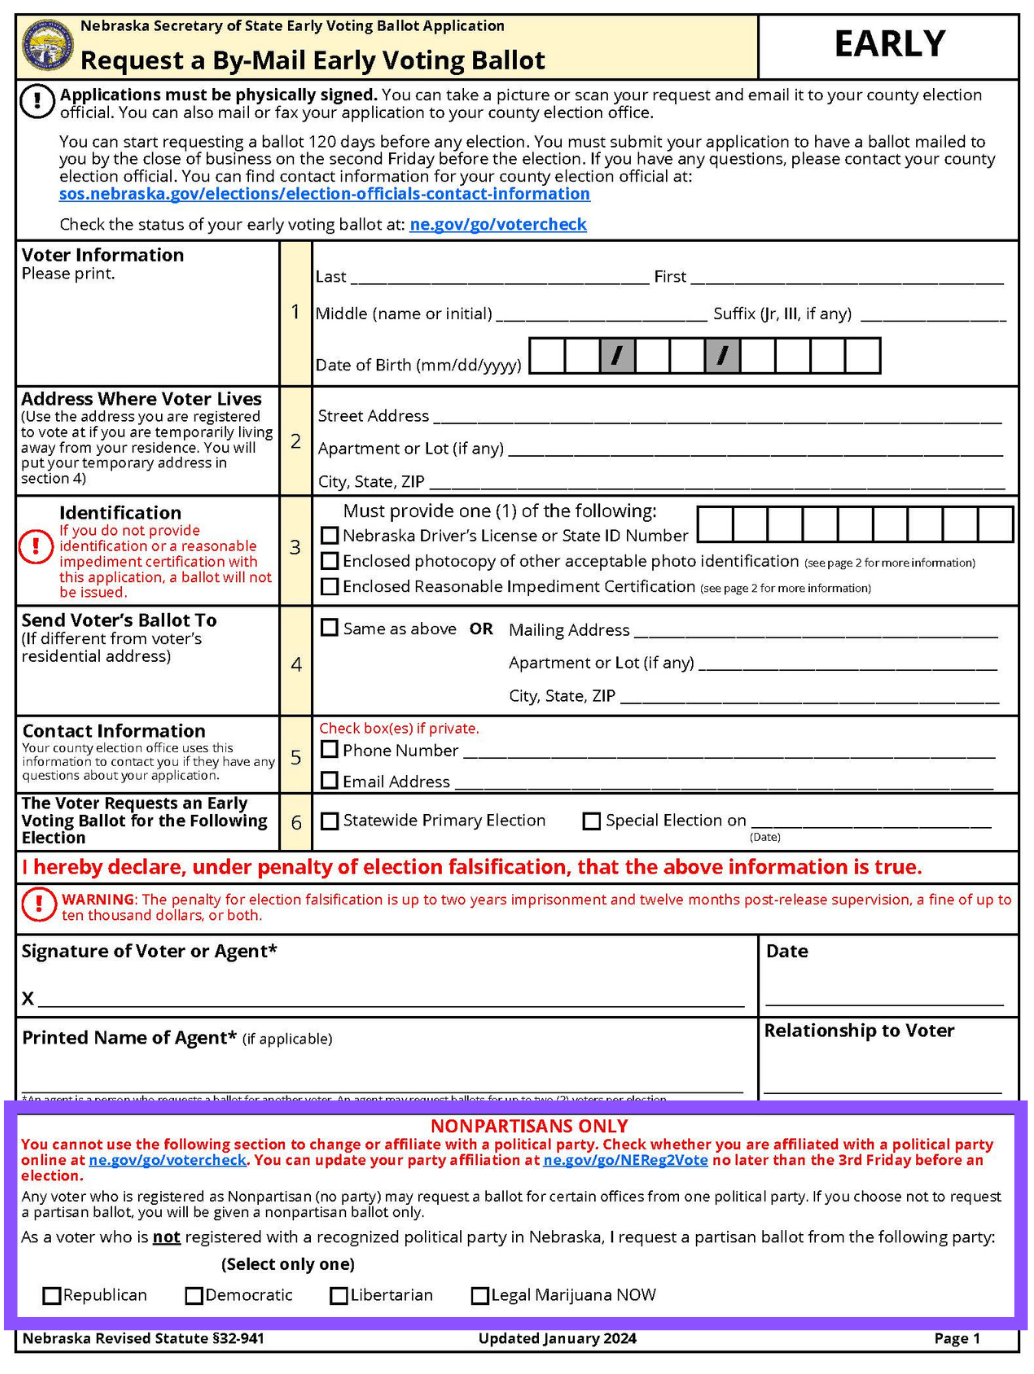 A picture of Nebraska's early voting application with the nonpartisan voting box highlighted.